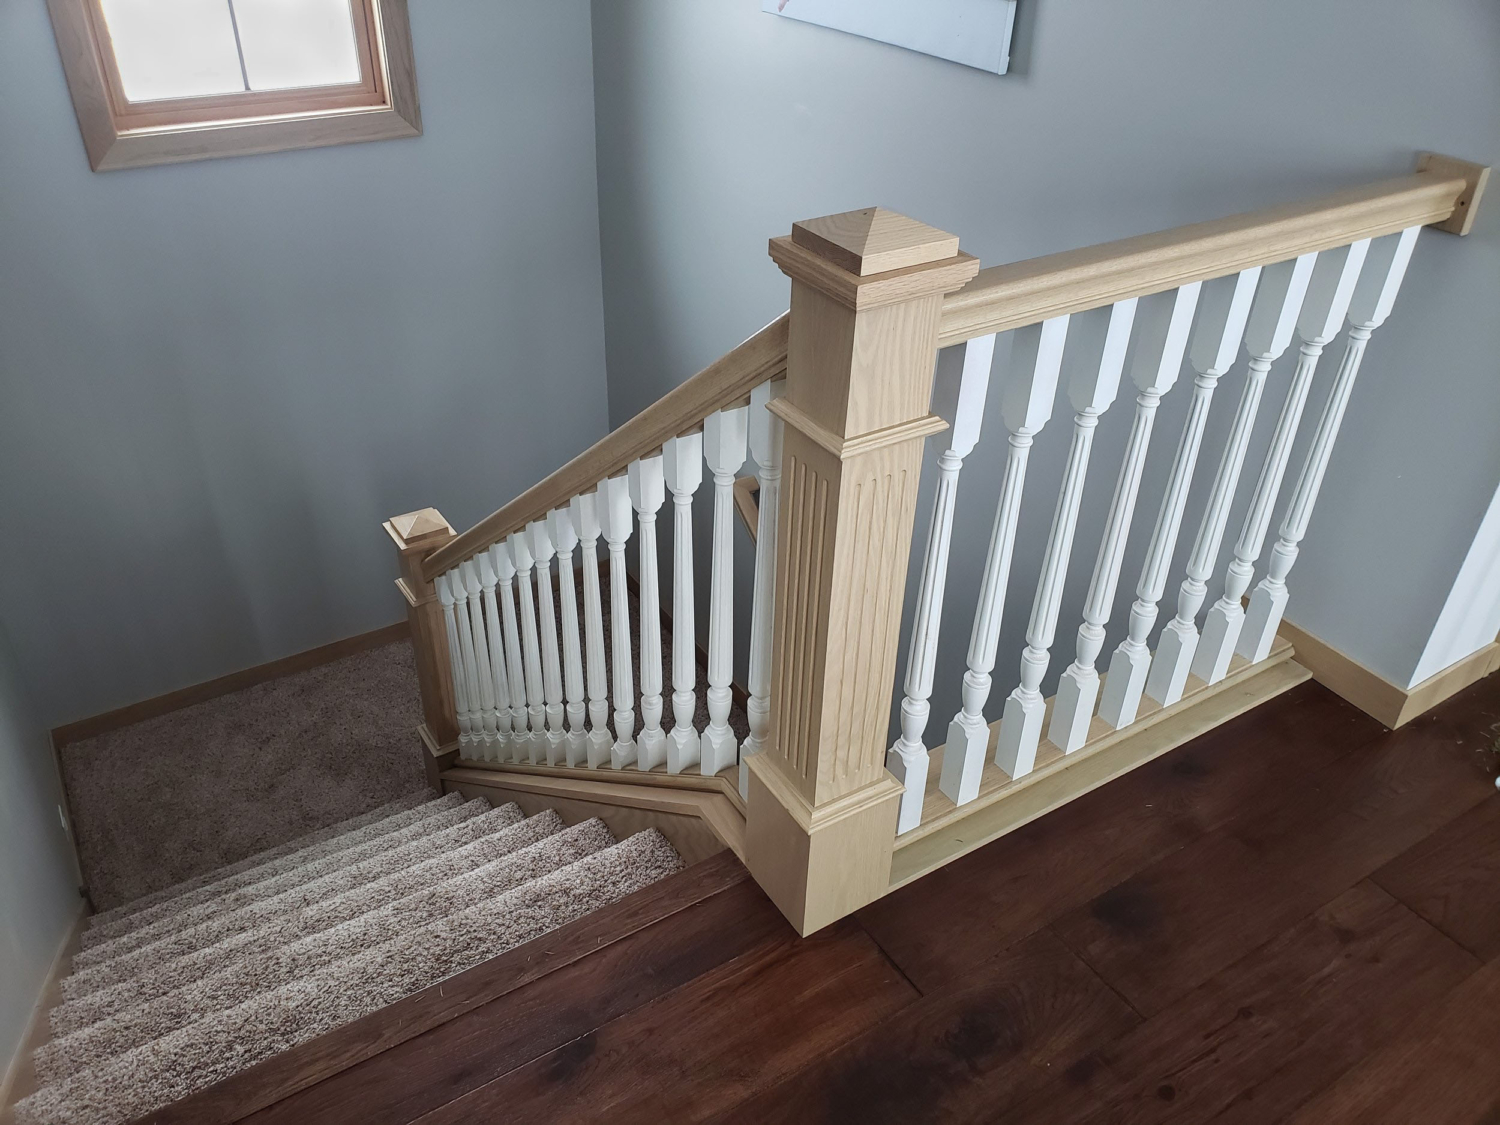 Finish Carpentry - Banister Railings Balusters - Due North Custom Construction